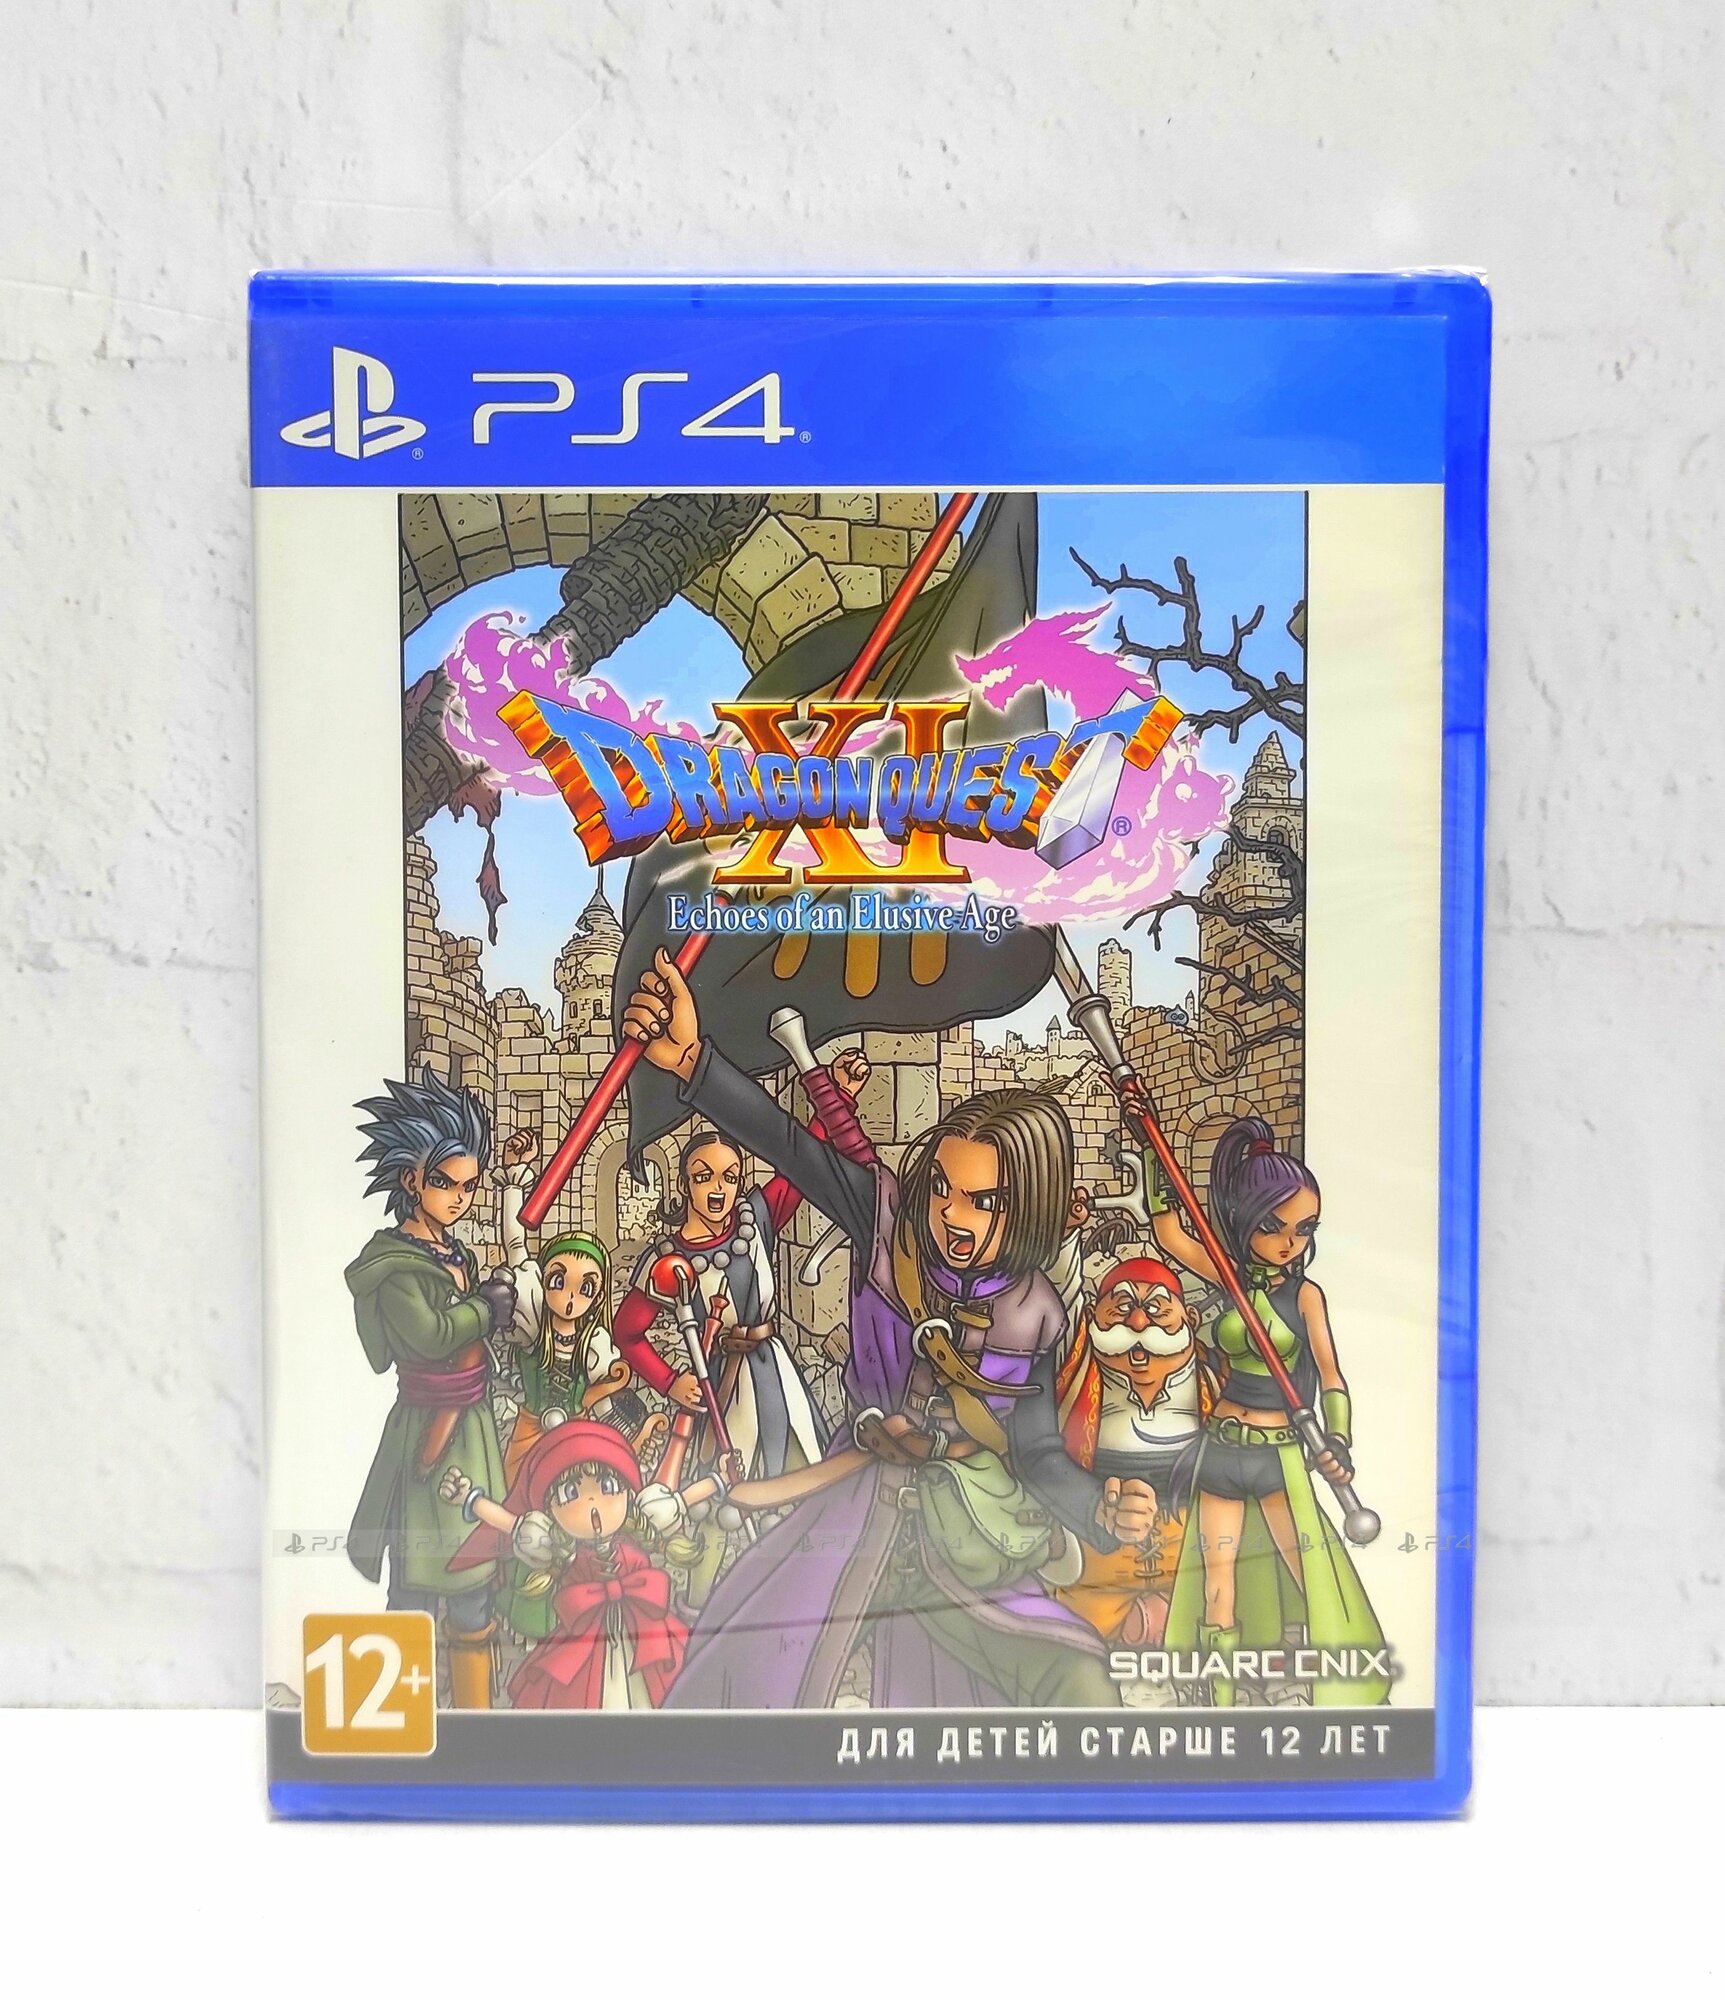 Dragon Quest 11 (XI) Echoes of an Elusive Age Видеоигра на диске PS4 / PS5